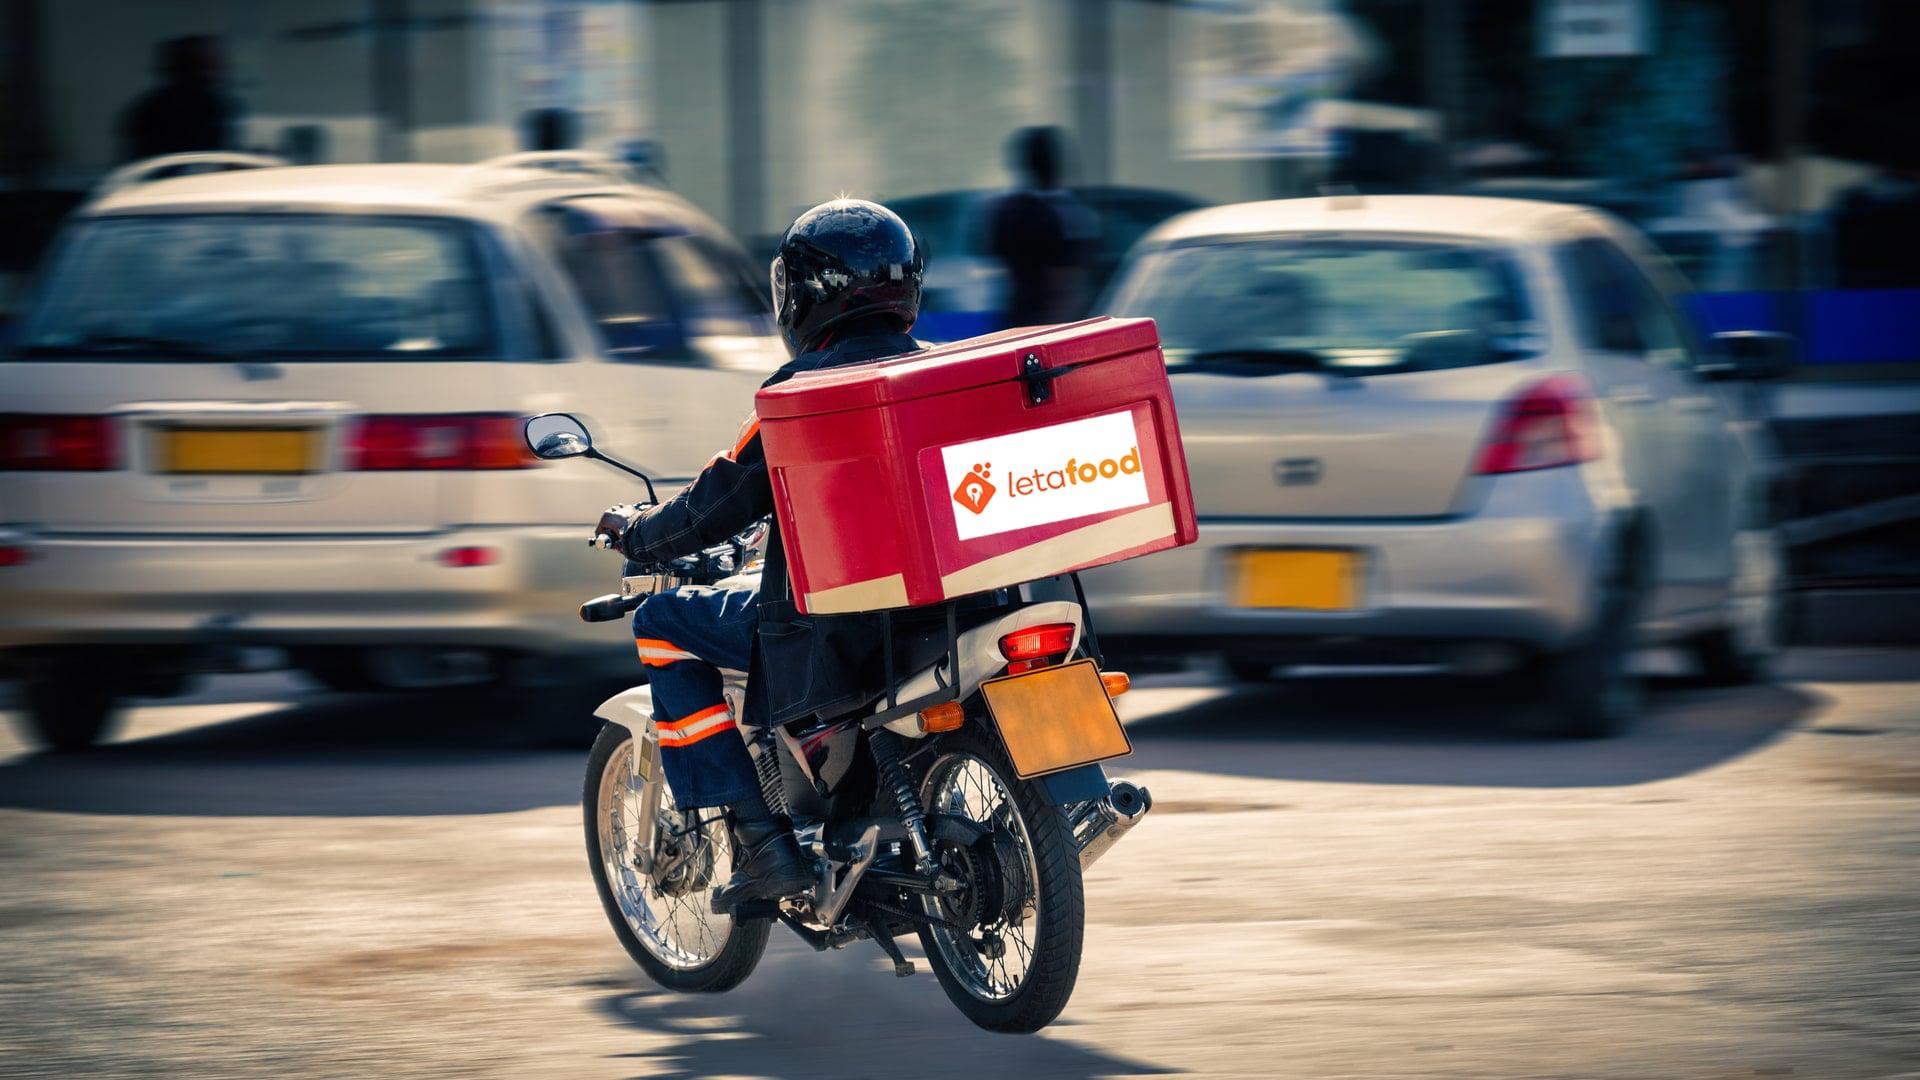 Will Africa produce the next DoorDash for Y Combinator?